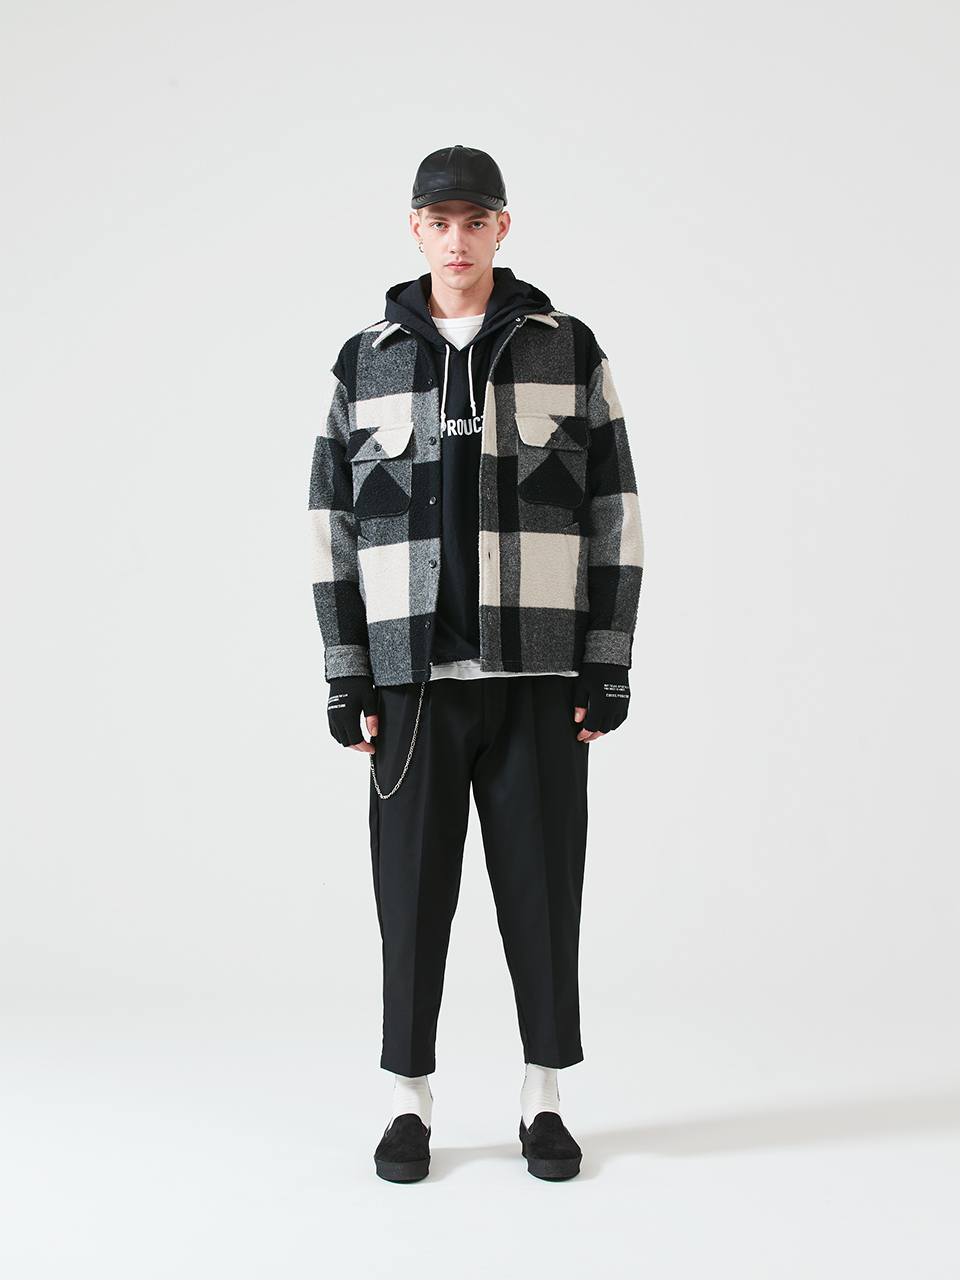 COOTIE クーティ 通販 19AW Napping Buffalo Check CPO Jacket